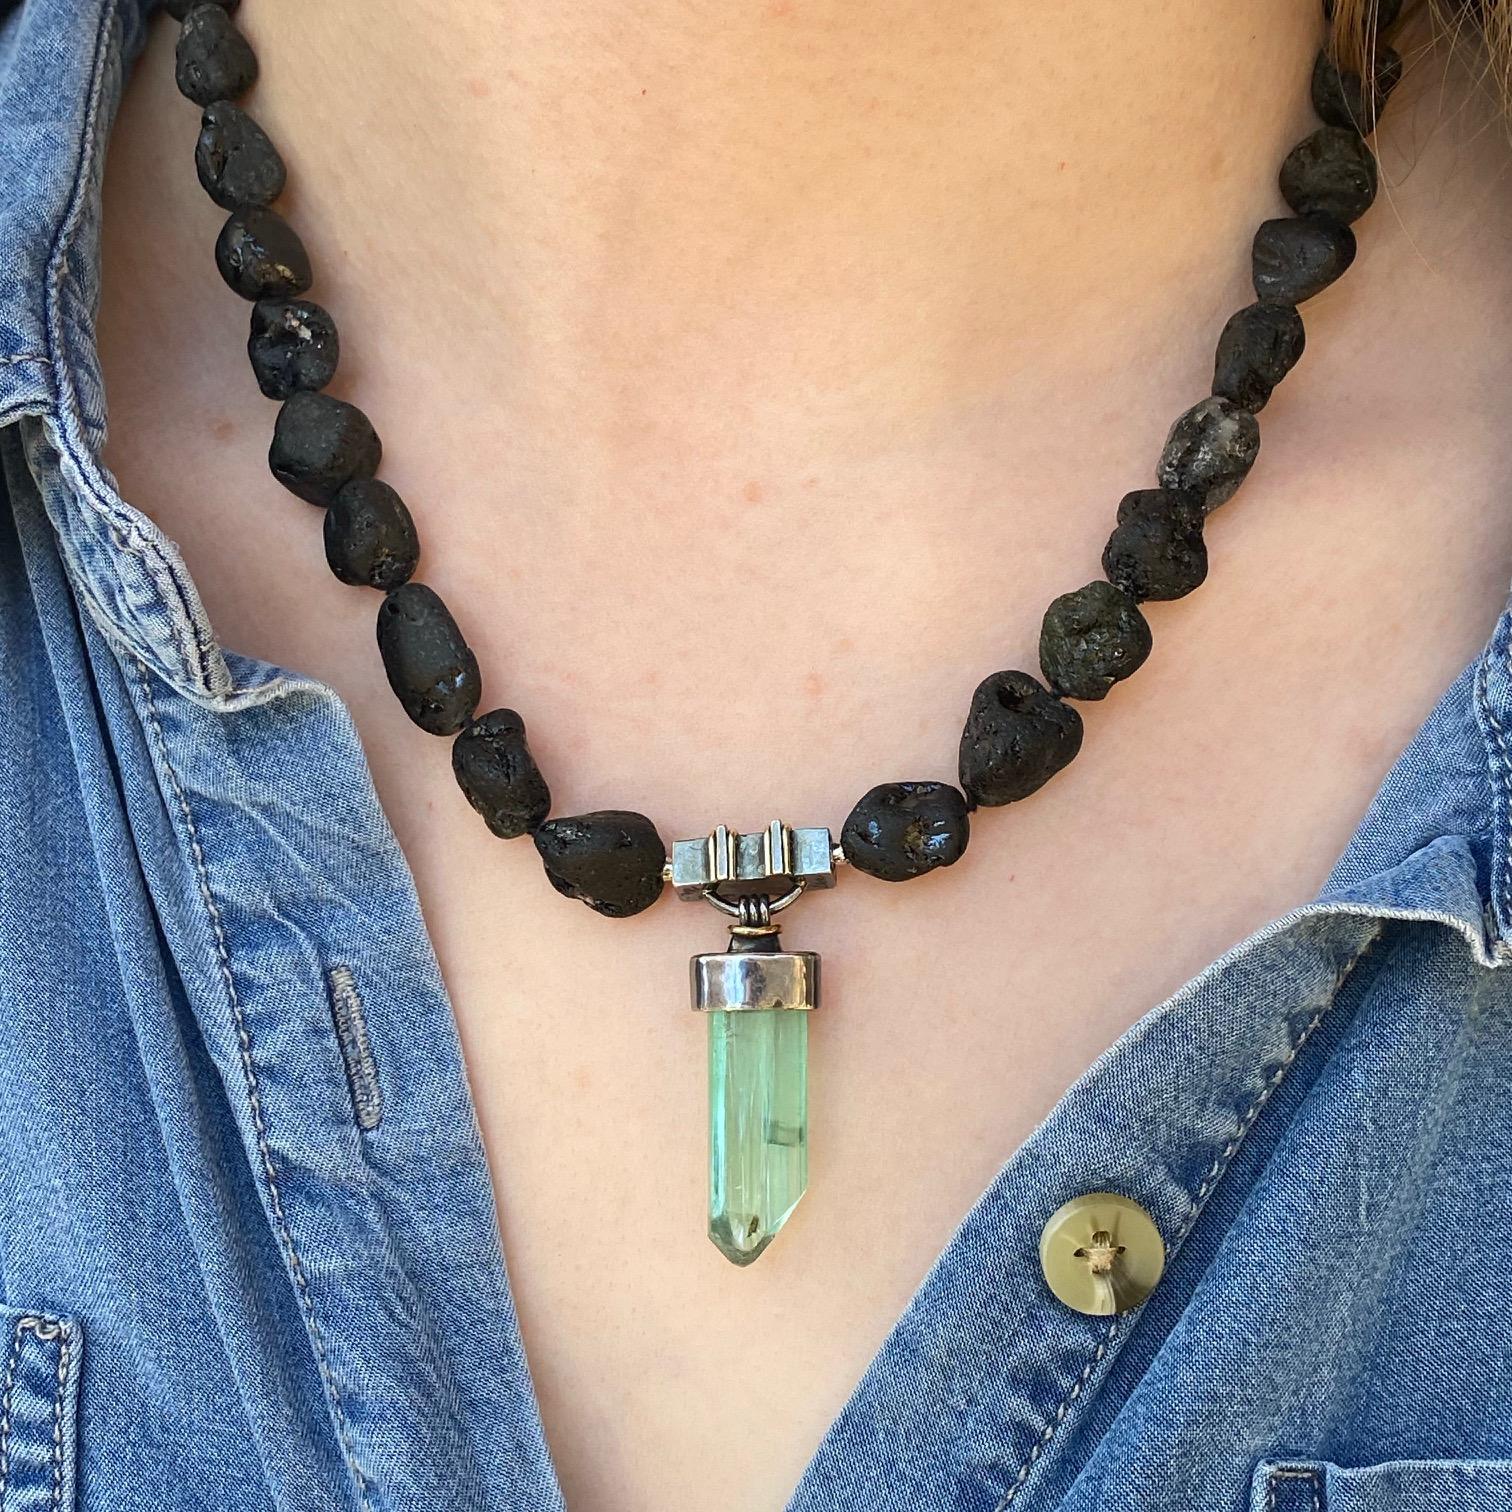 Contemporary Black Tourmaline Necklace with a Silver and 18k Green Tourmaline Crystal Clasp